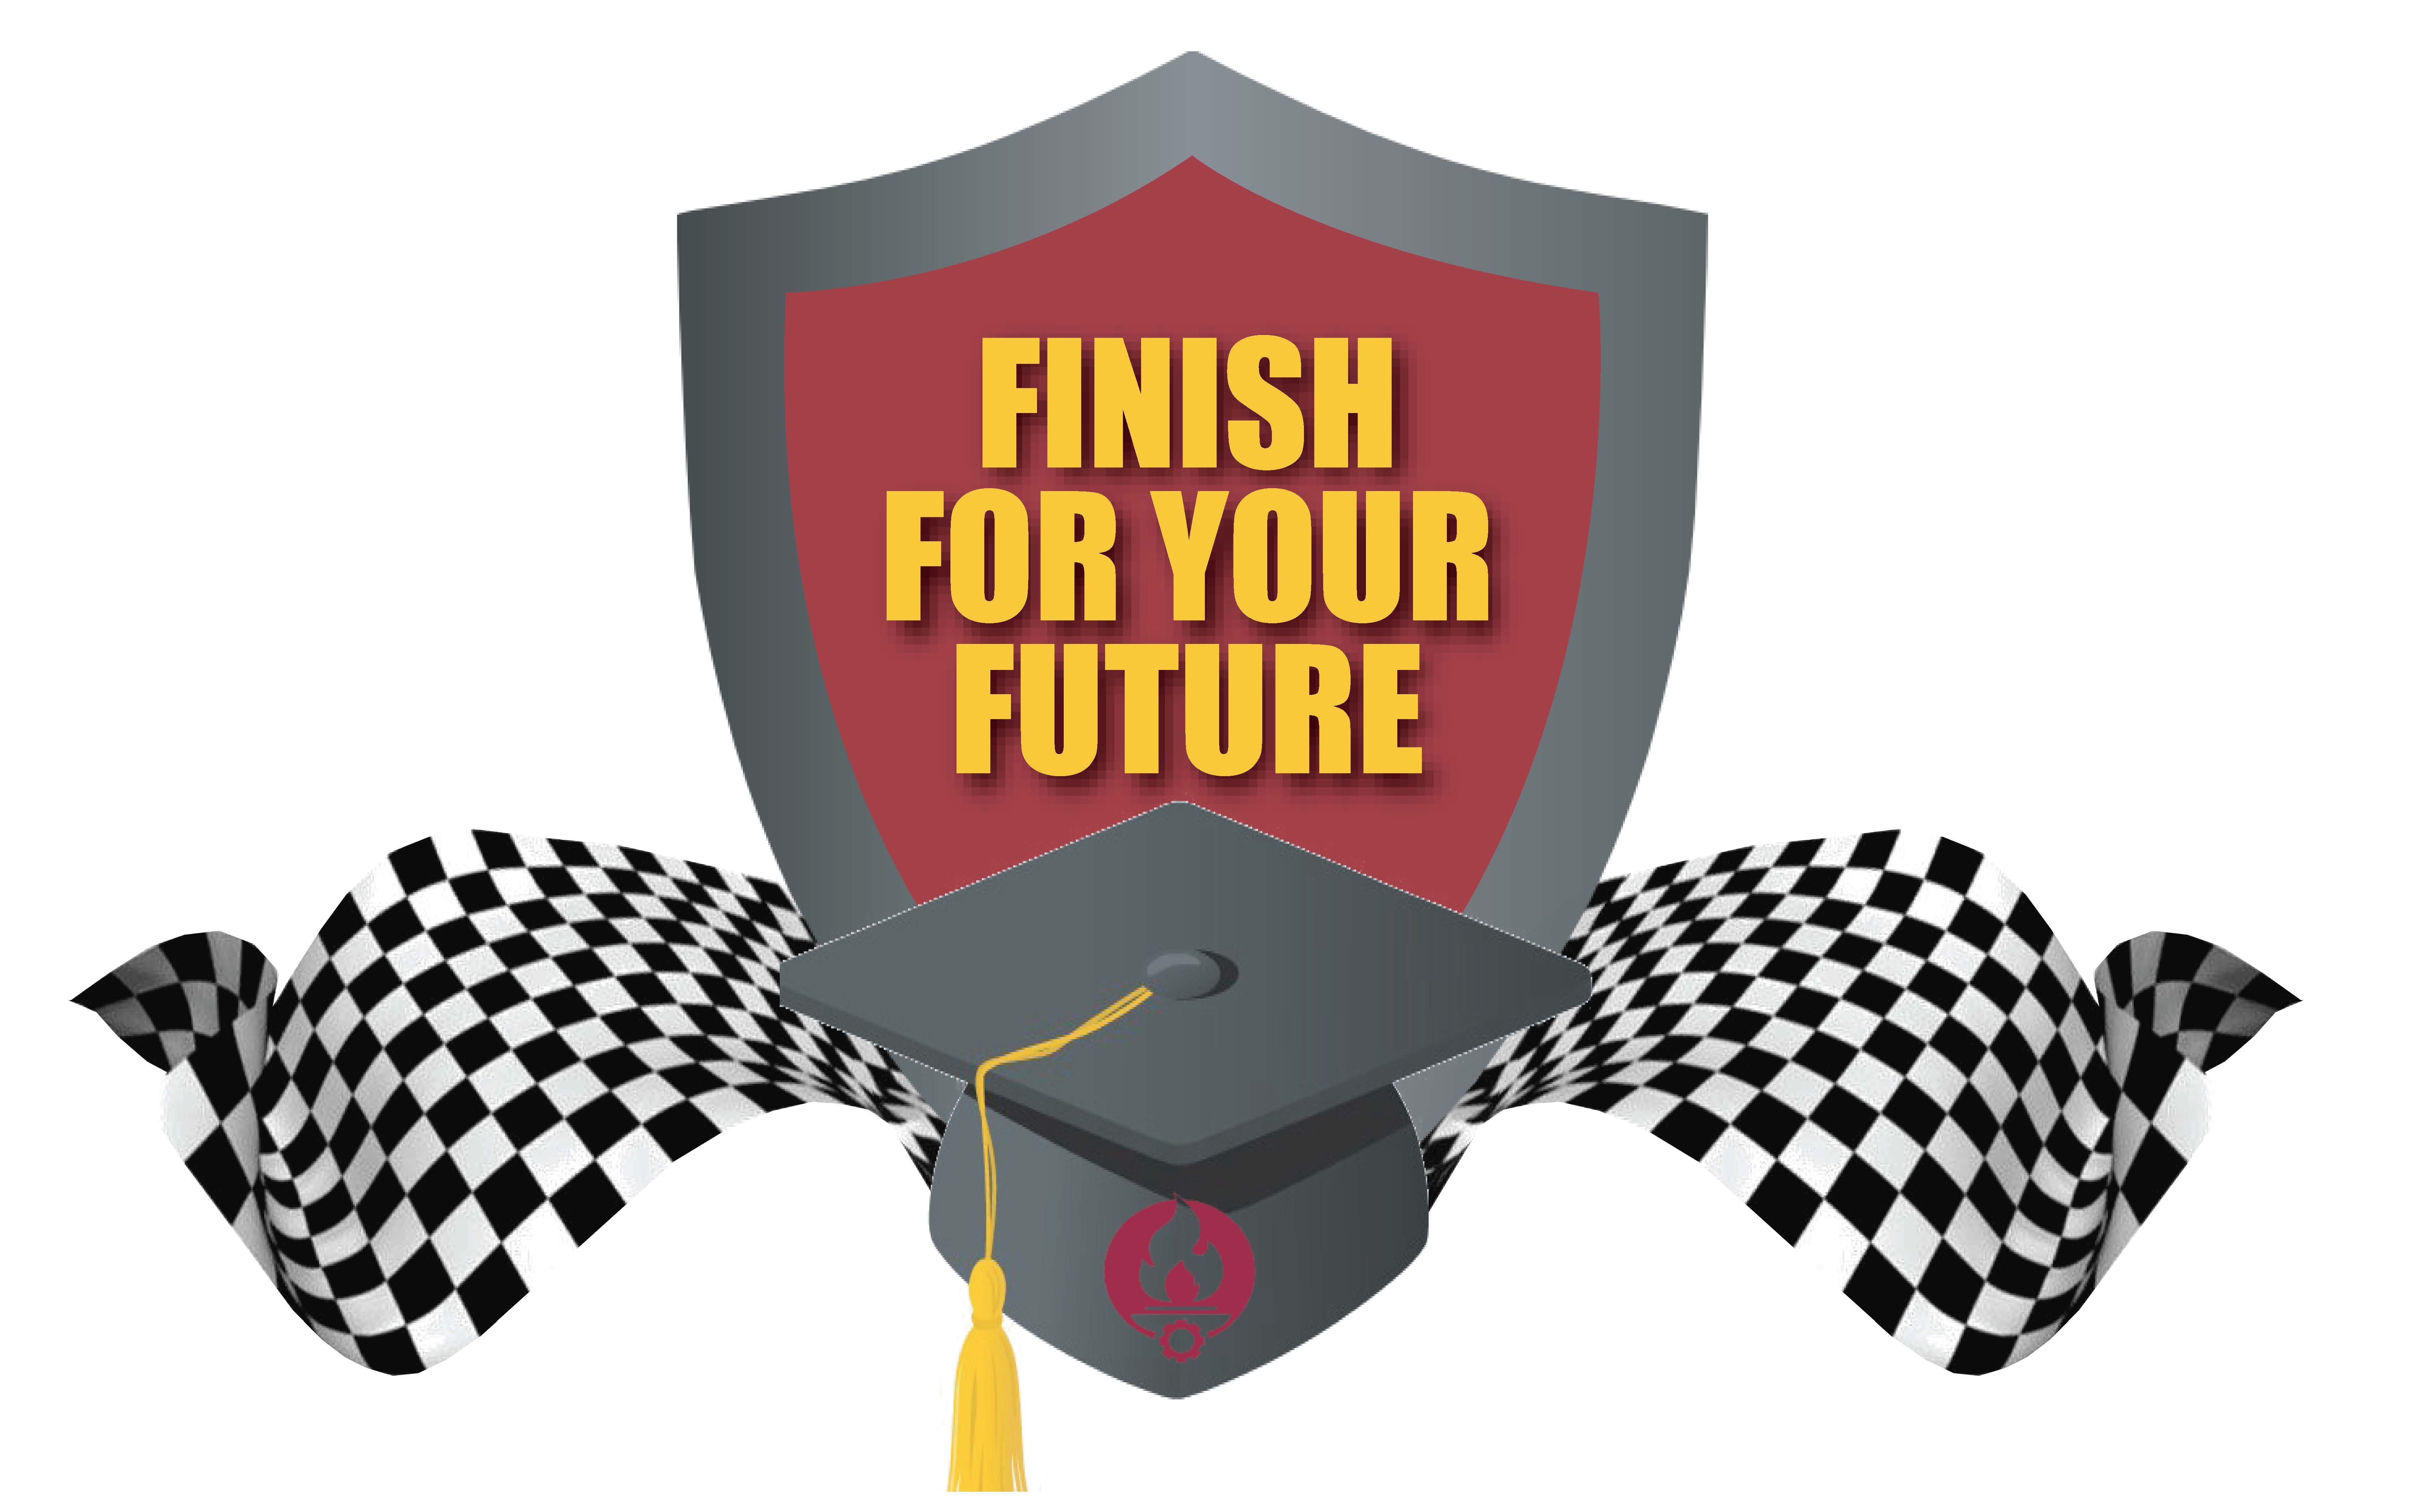 Logo for the Finish for Your Future campaign